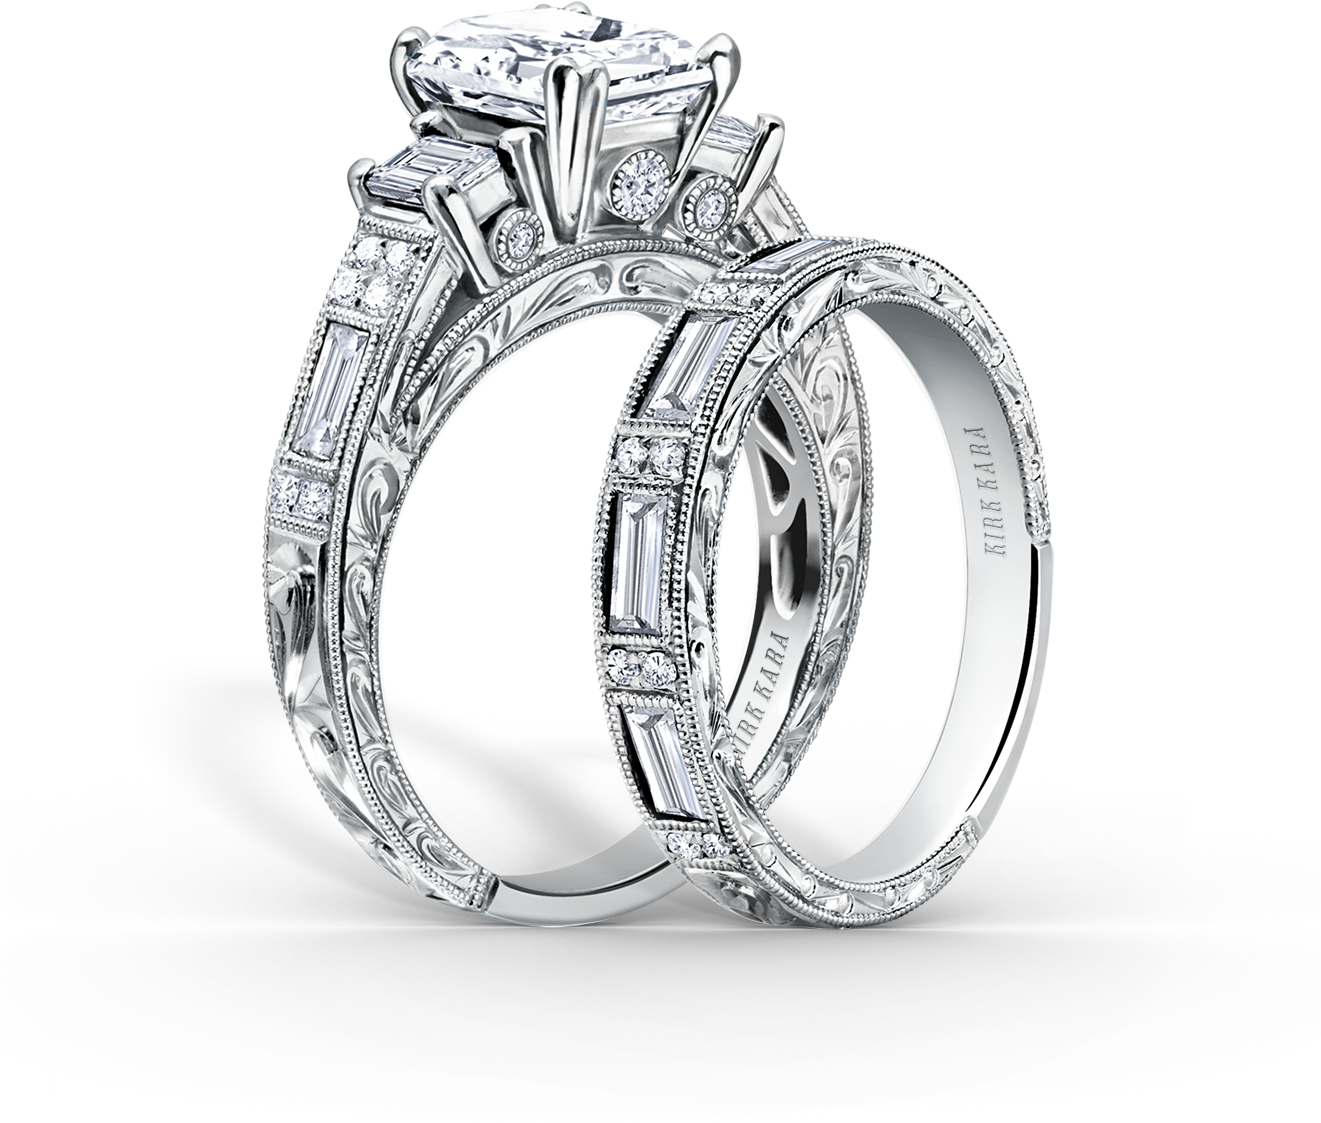 Hand Engraved Diamond Engagement Rings By Kirk Kara - 4.00 Cttw Emerald Cut Sapphire Ring And Band Set - (1320x1320)